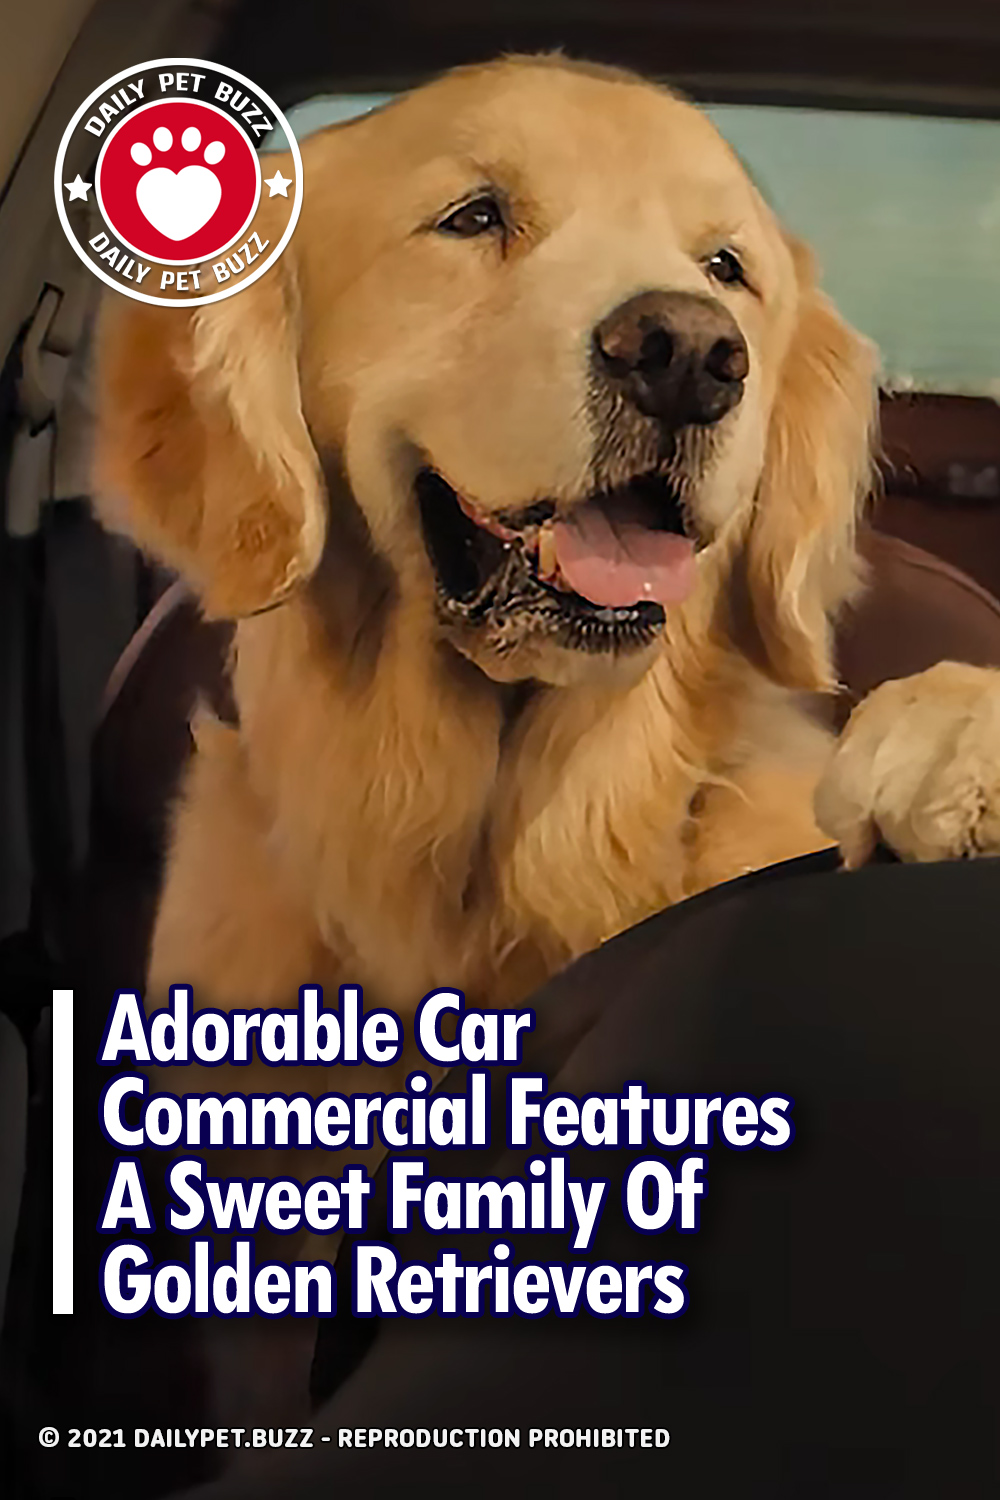 Adorable Car Commercial Features A Sweet Family Of Golden Retrievers